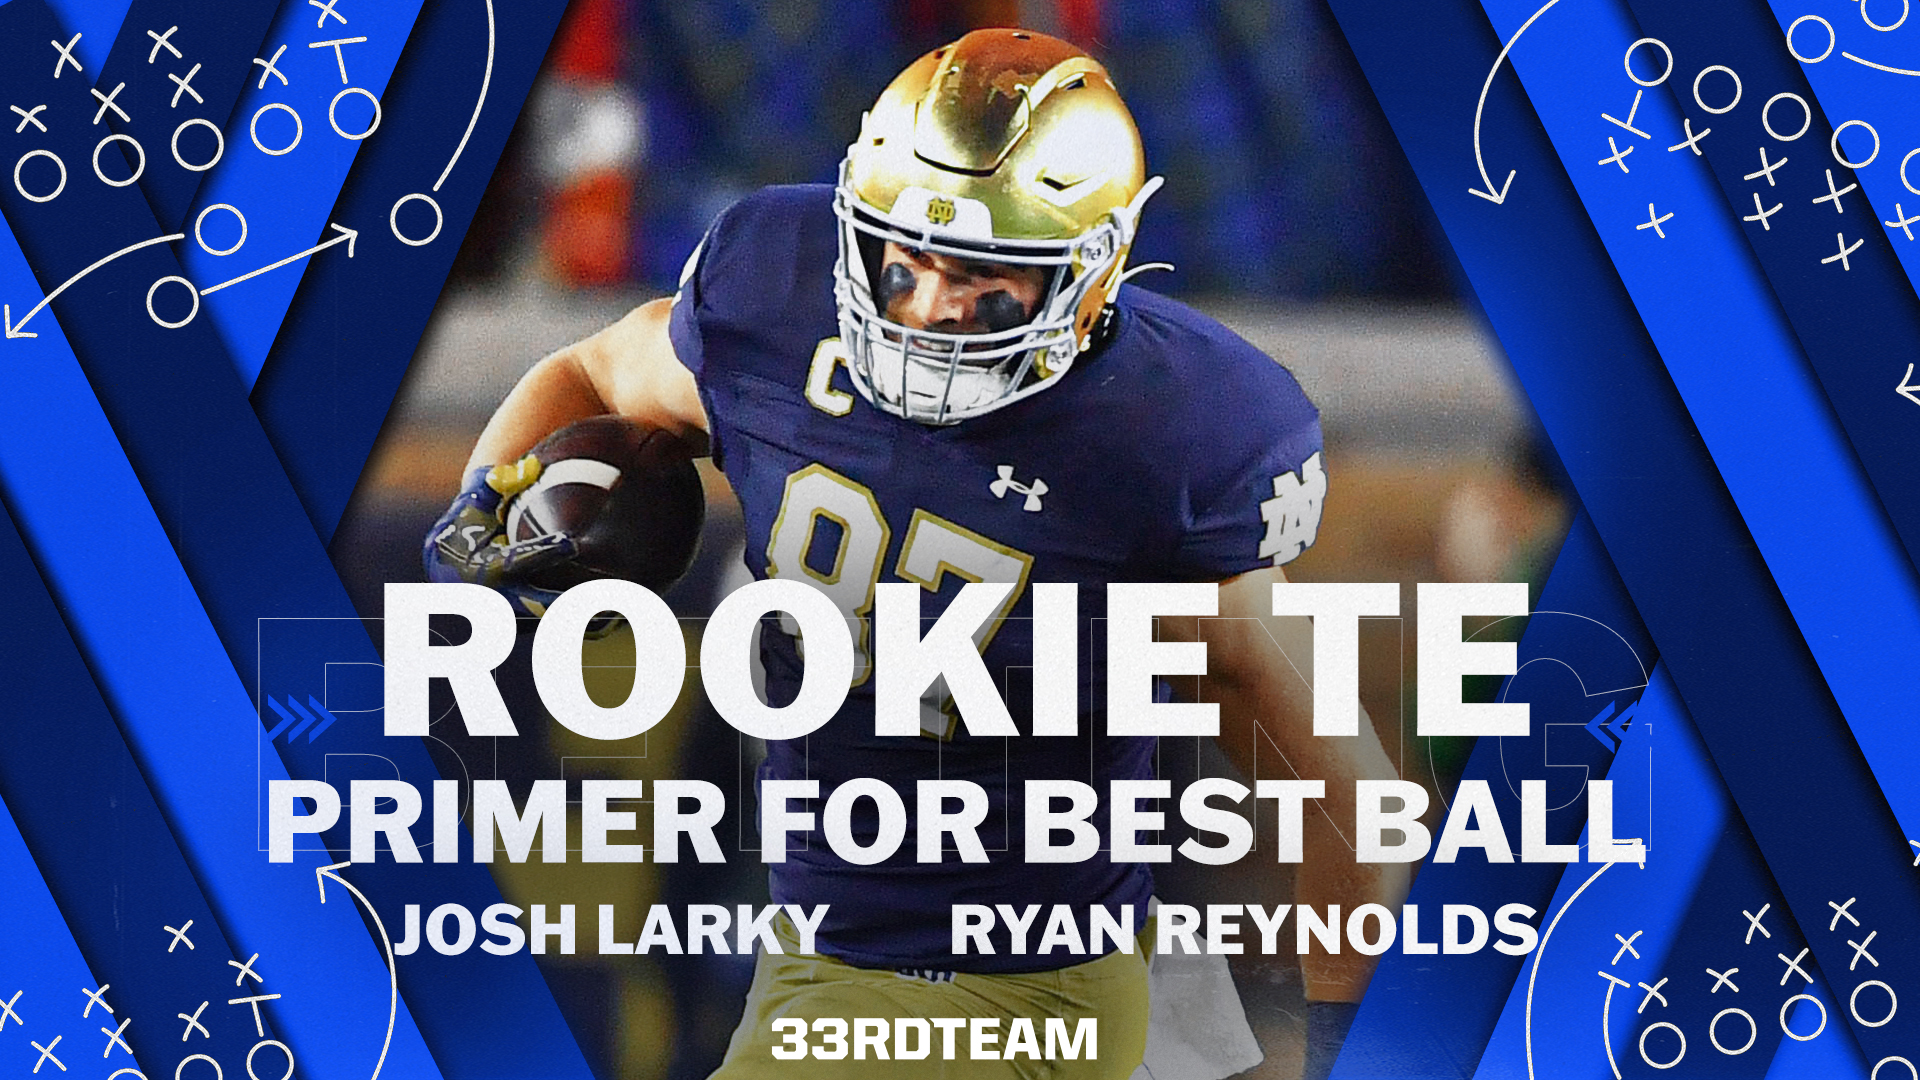 2023 Rookie Tight End Fantasy Football Best Ball Primer